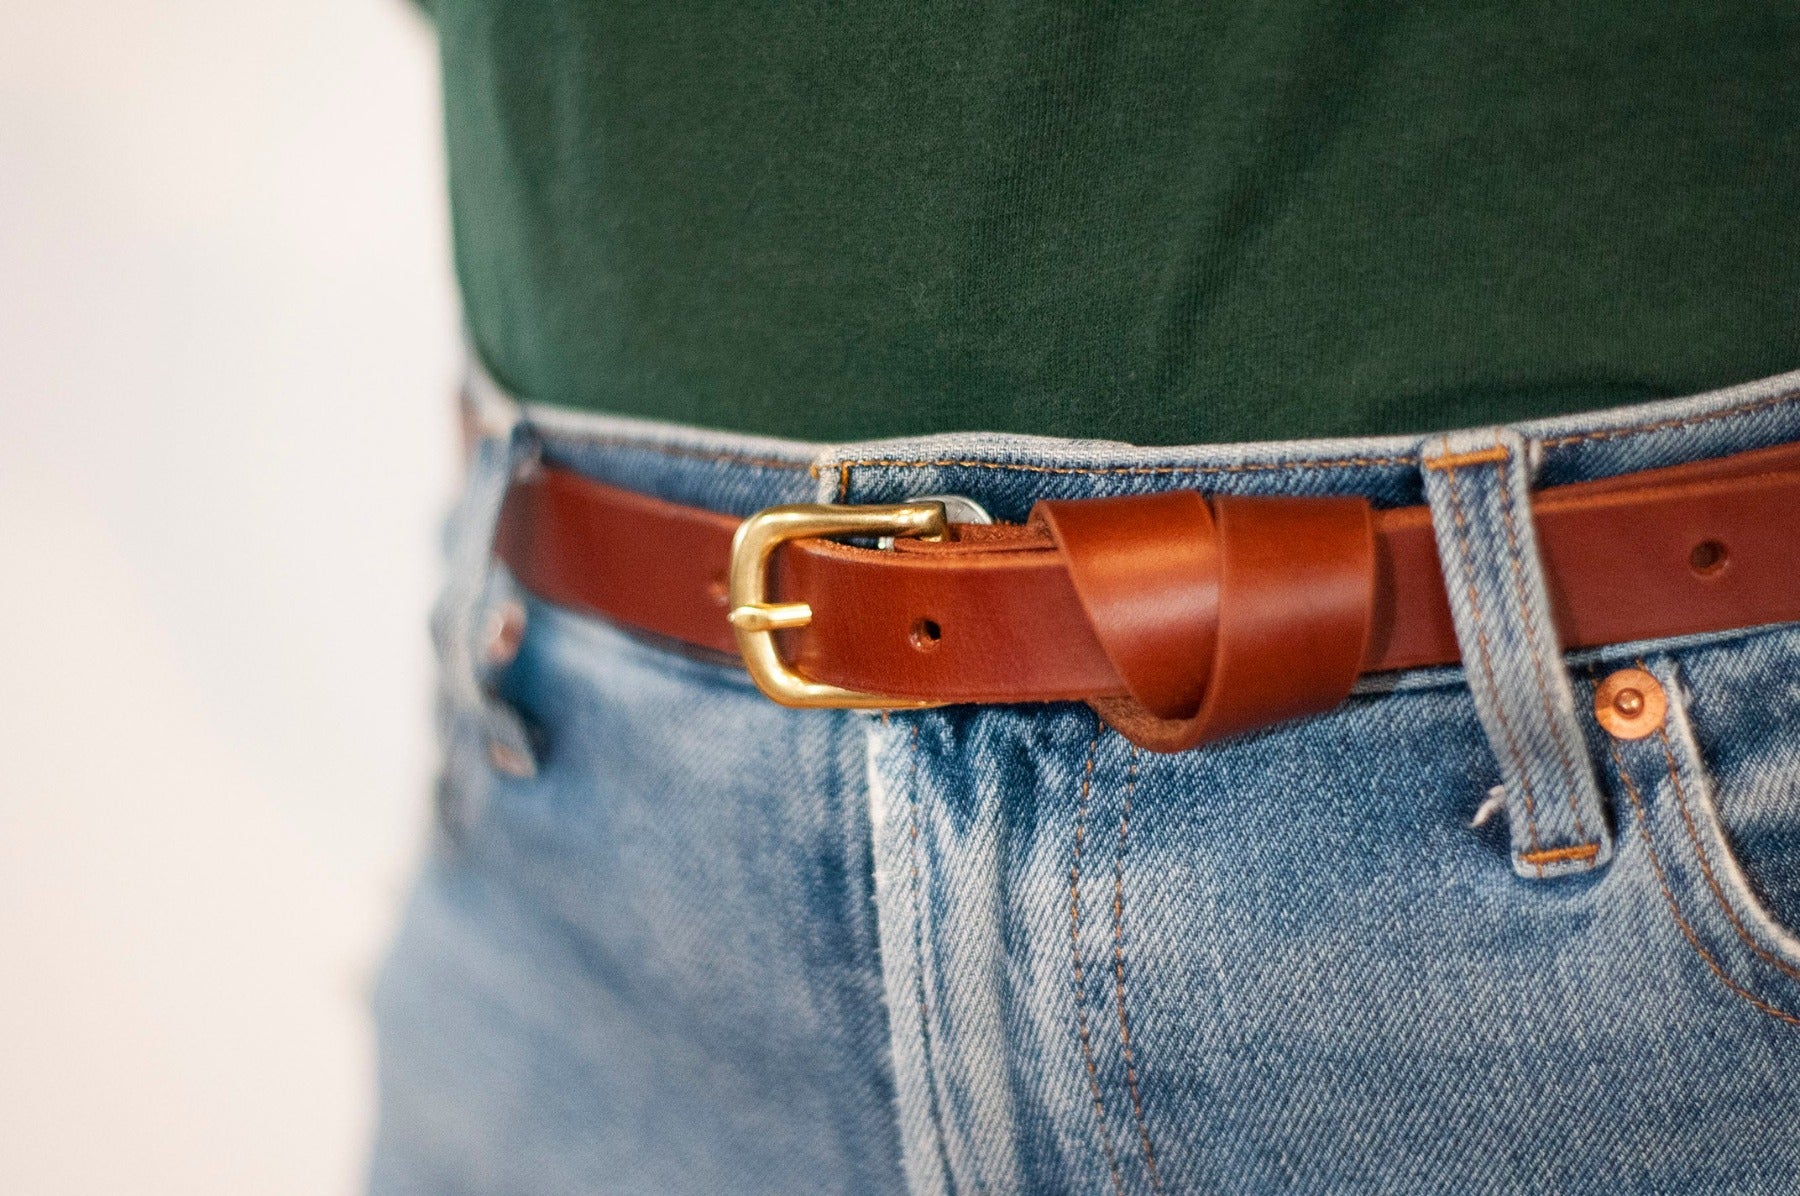 Narrow Leather Belt in brown leather with brass buckle